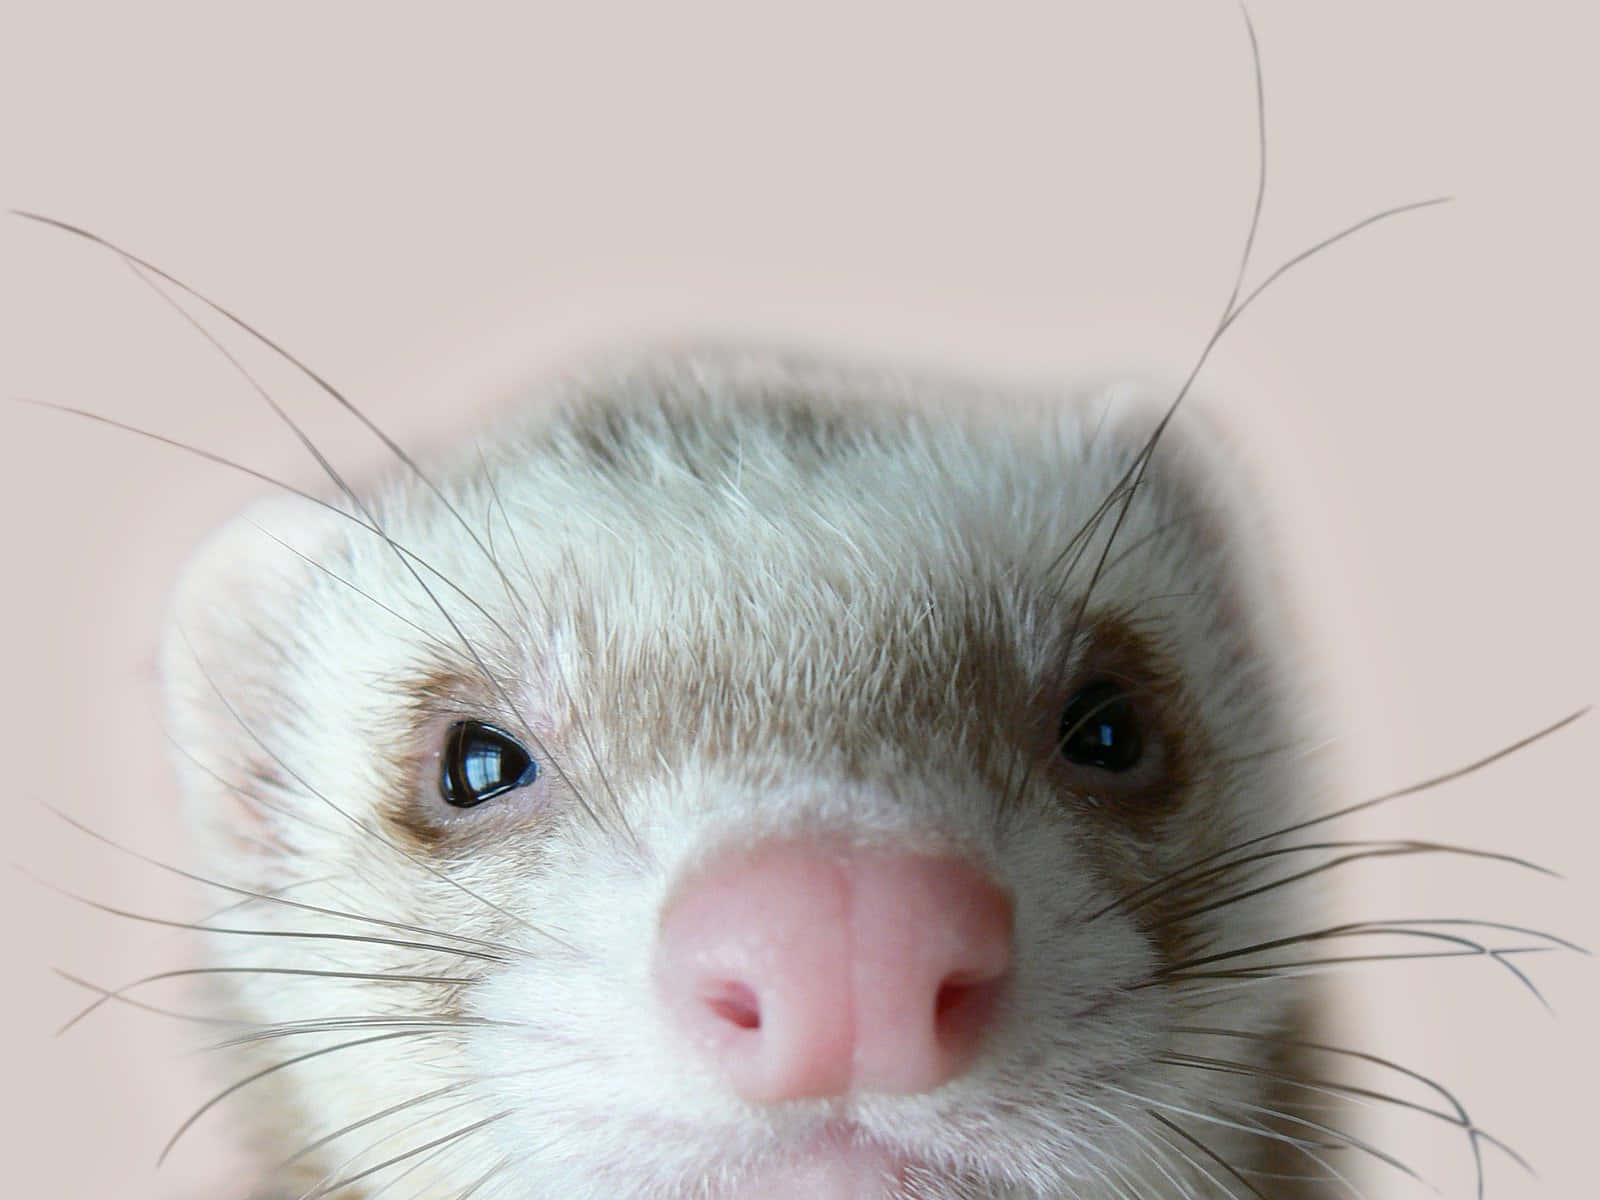 Check out this exceptionally cute little ferret!